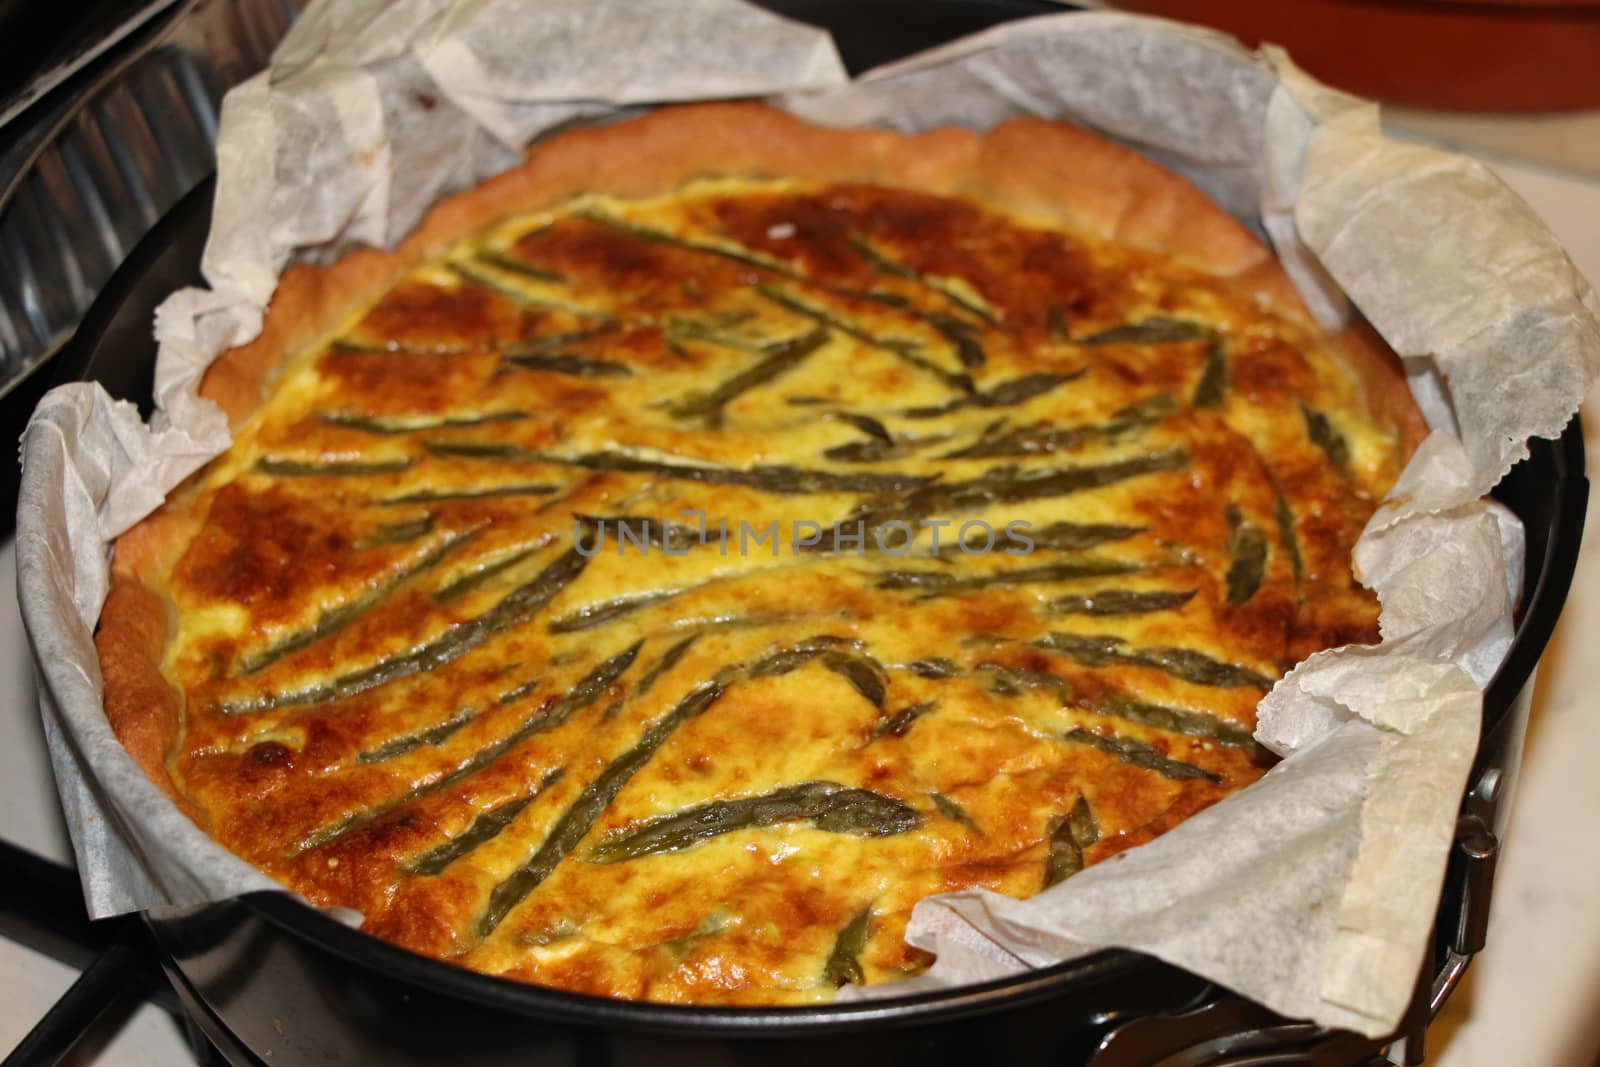 Asparagus tart pastry by marcobir